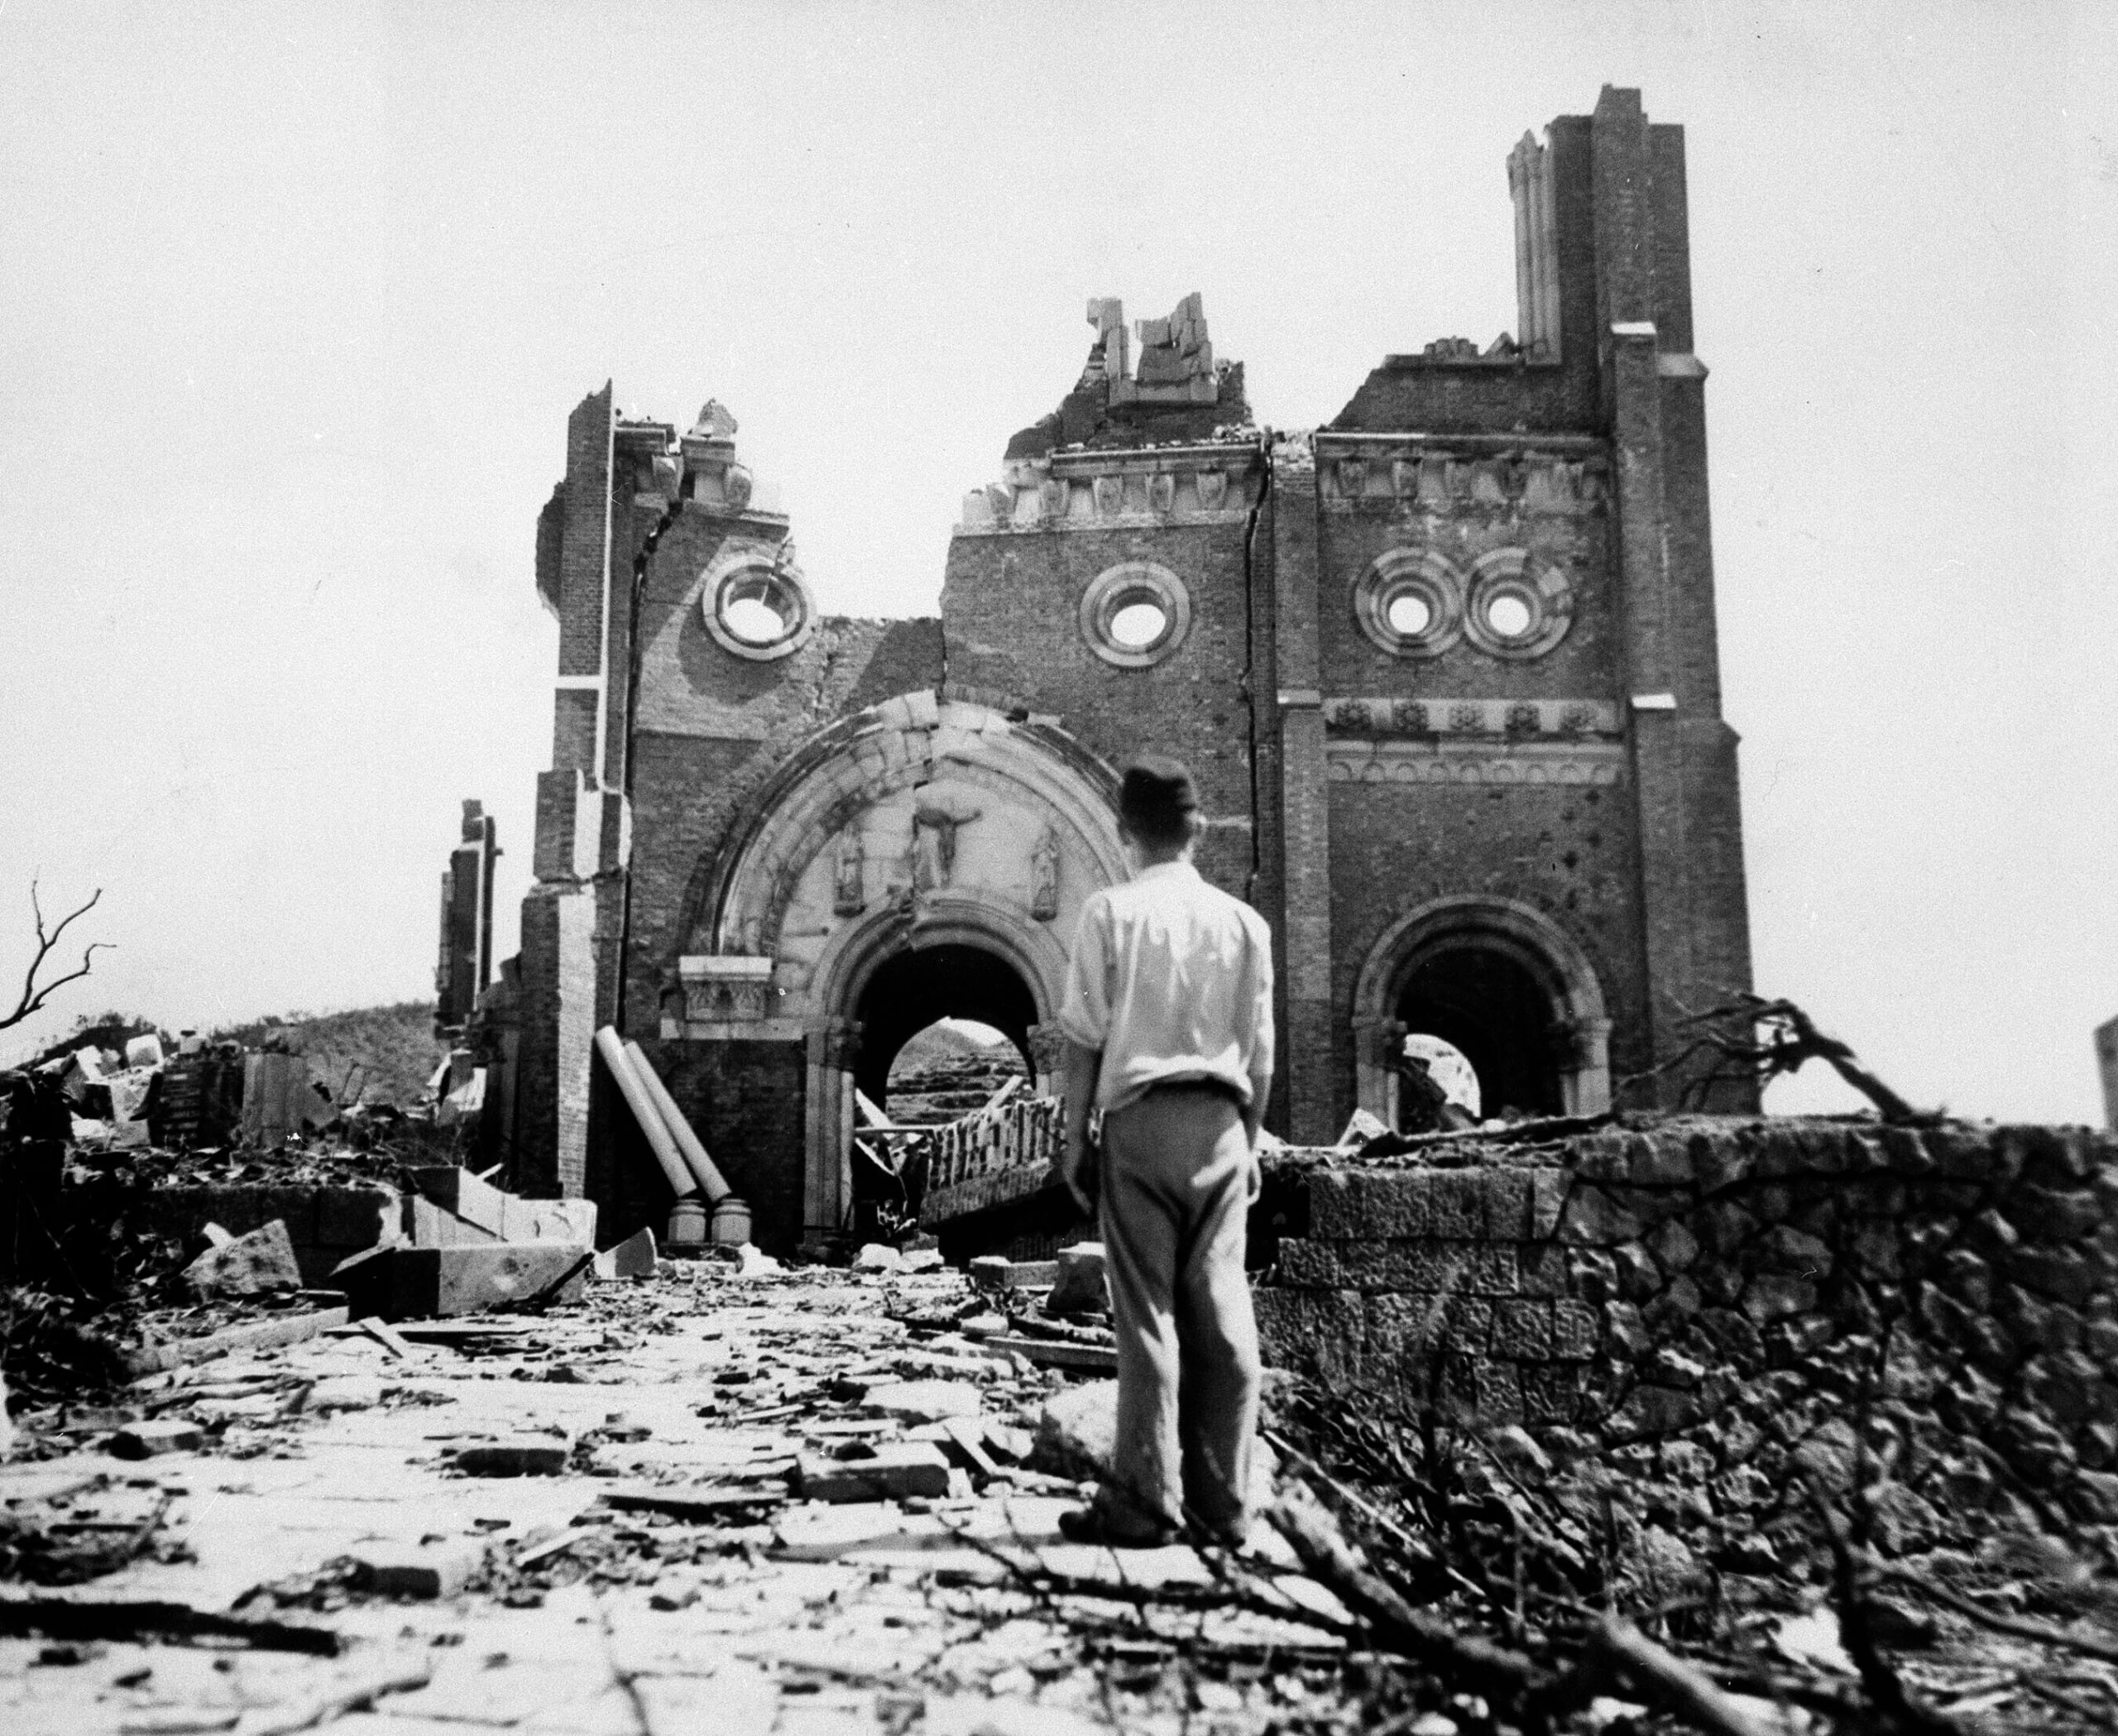 Today in history: The atomic bombing of Nagasaki decimates a Catholic church, killing thousands of believers nearby